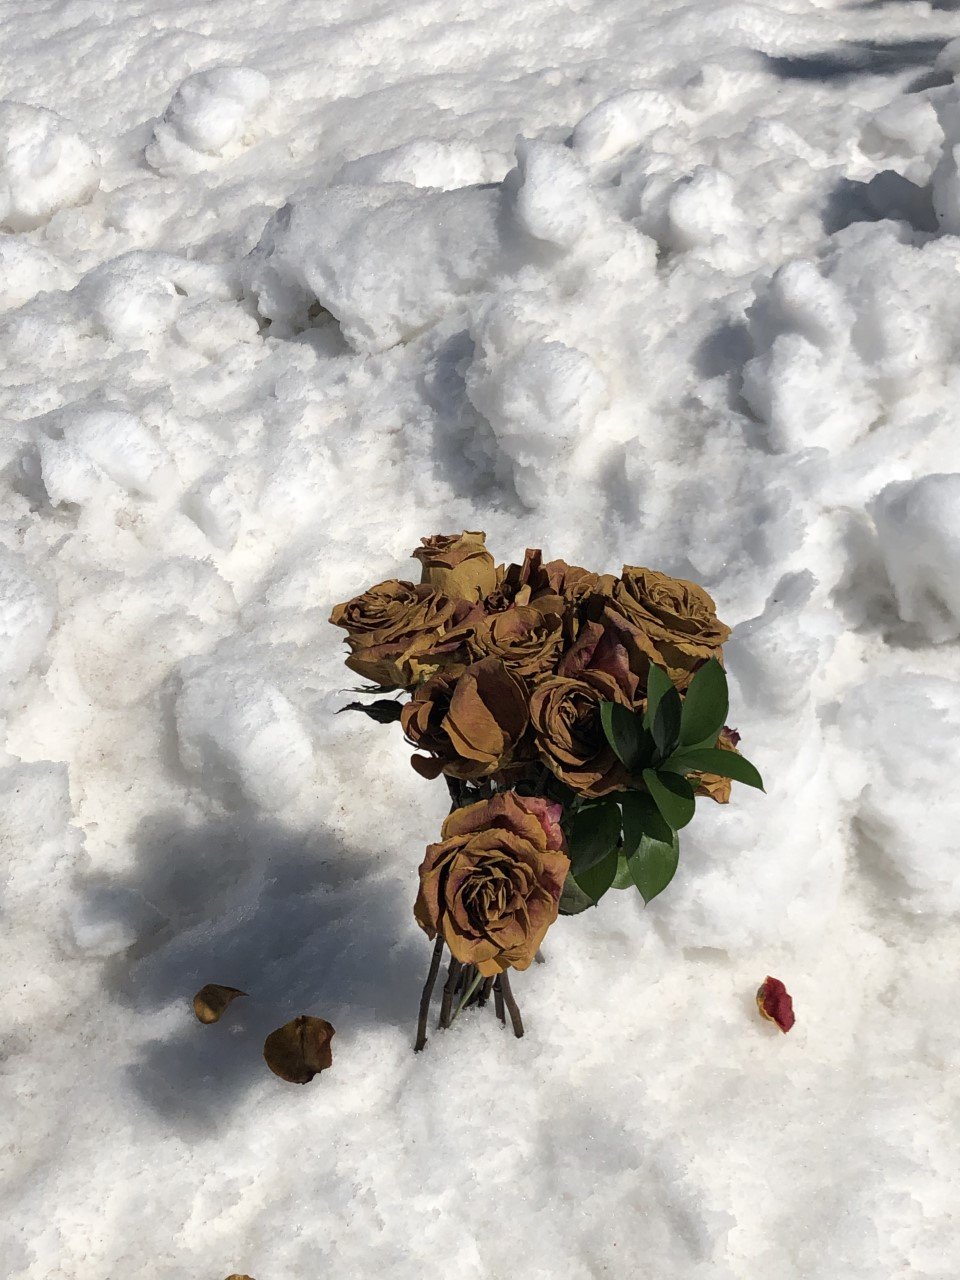 dried roses in snow